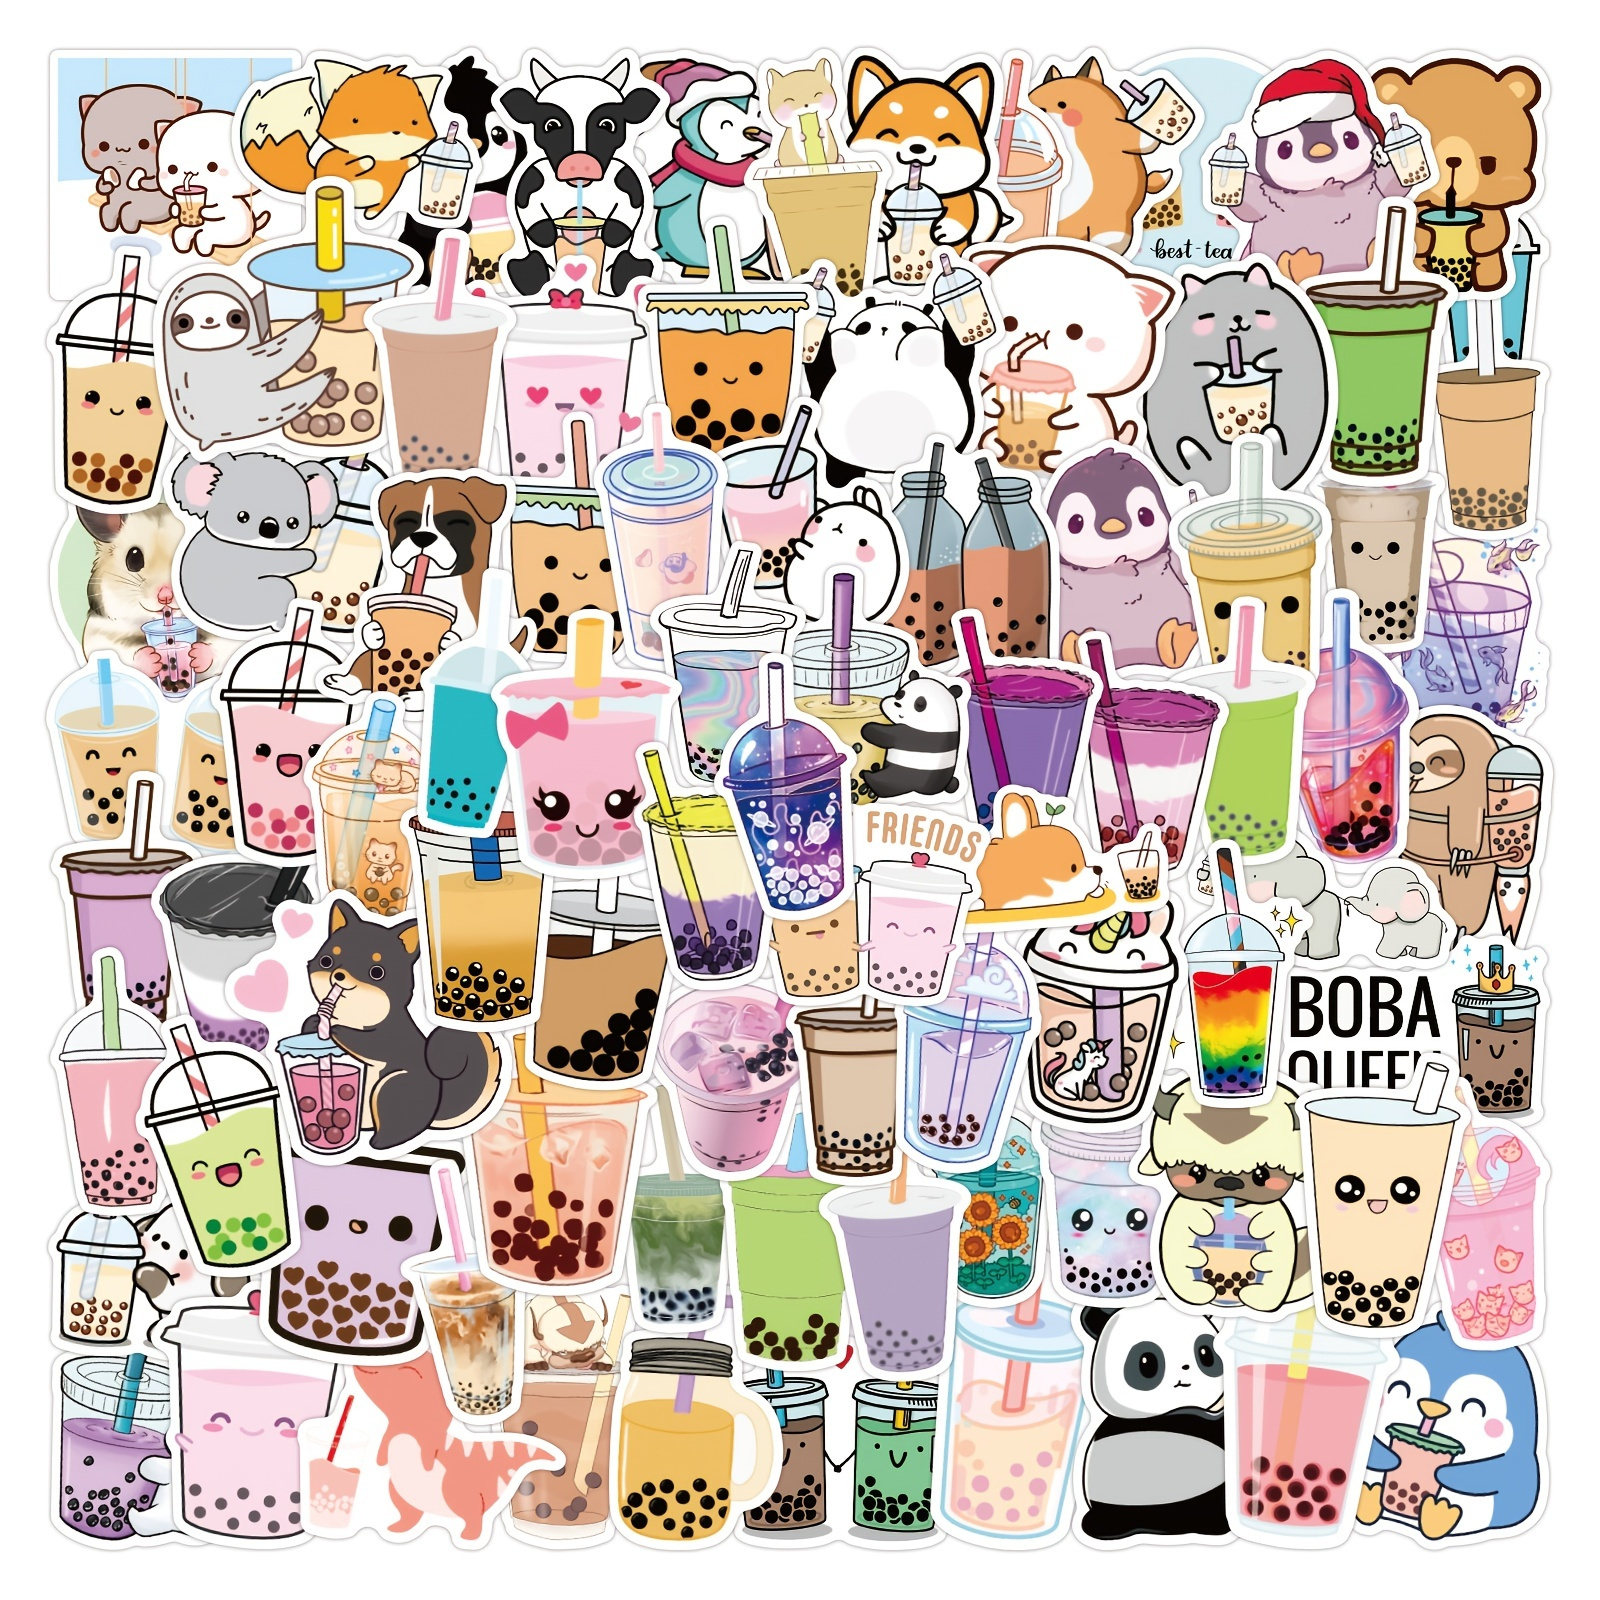 50pcs Boba Tea Stickers Bubble Tea Pearl Milk Tea Stickers, Vinyl Waterproof  Stickers for Laptop,Bumper,Water Bottles,Computer,Phone,Hard hat,Car  Stickers and Decals,Adults Kids Teens for Stickers